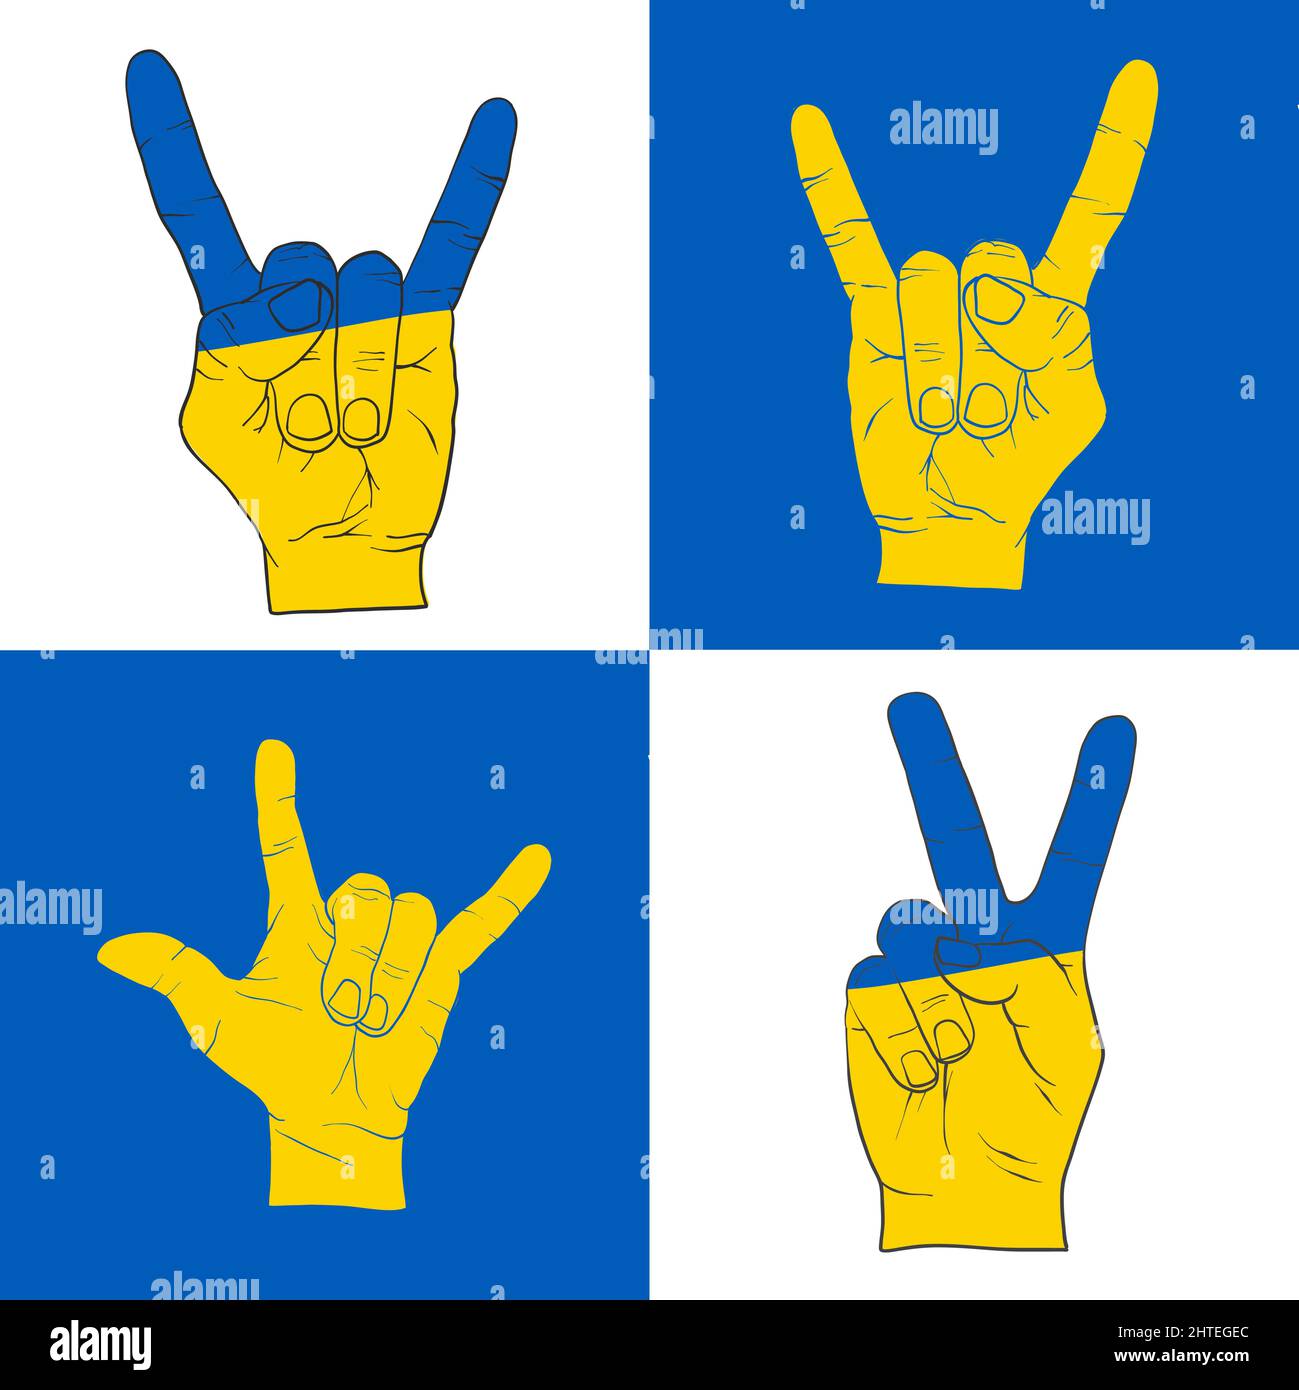 Various peaceful hand signs. Support icon for Kyiv and Ukraine people. Stay Strong together. Patriotic symbol, icon.-SupplementalCategories+=Images Stock Vector